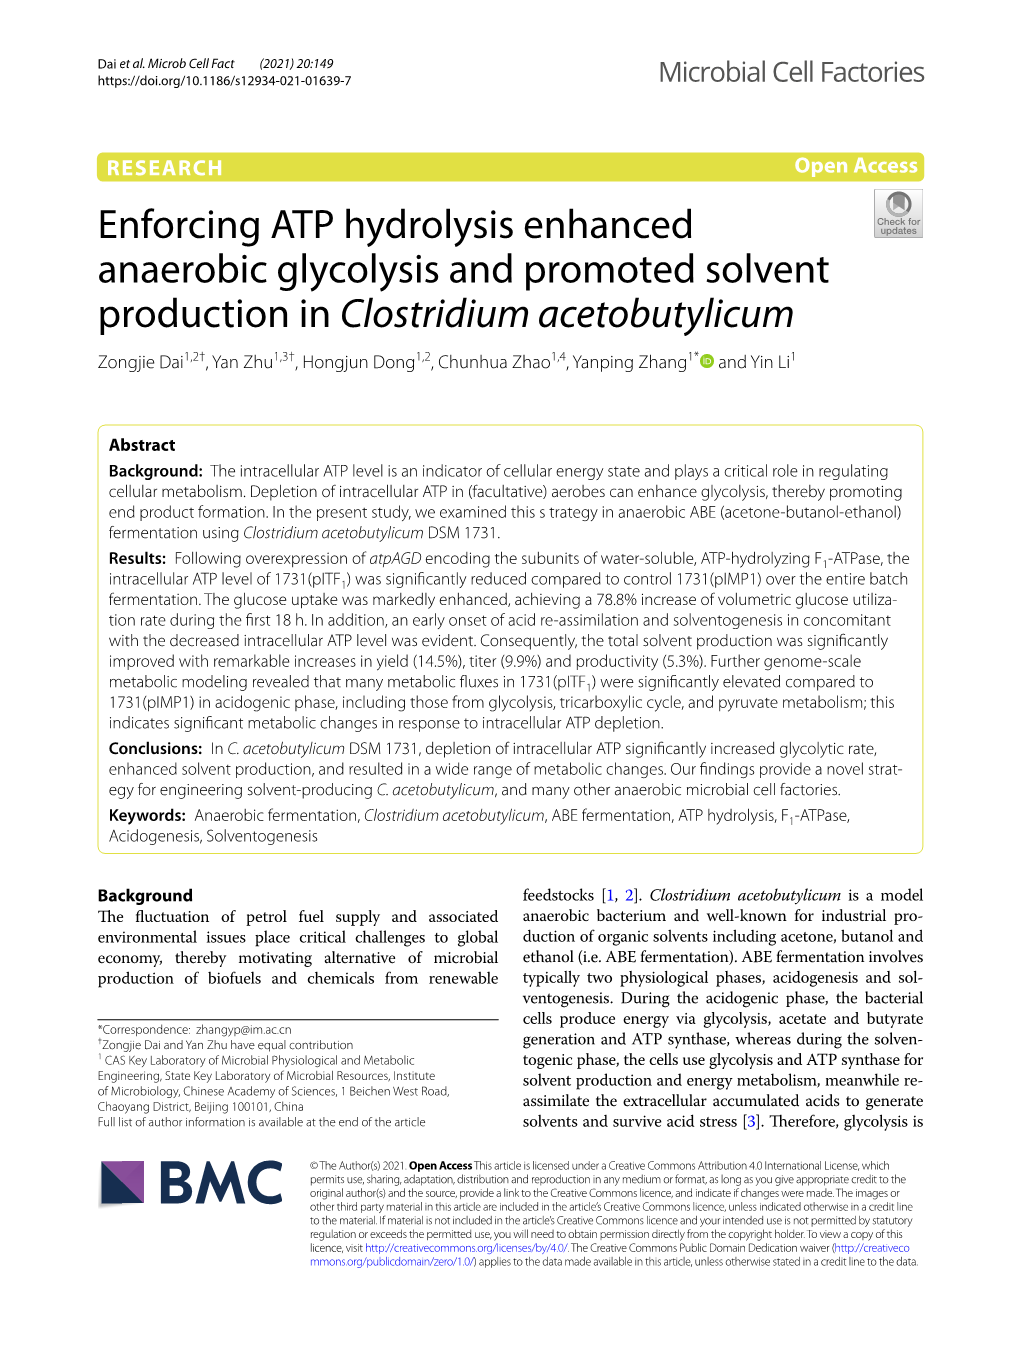 Enforcing ATP Hydrolysis Enhanced Anaerobic Glycolysis and Promoted